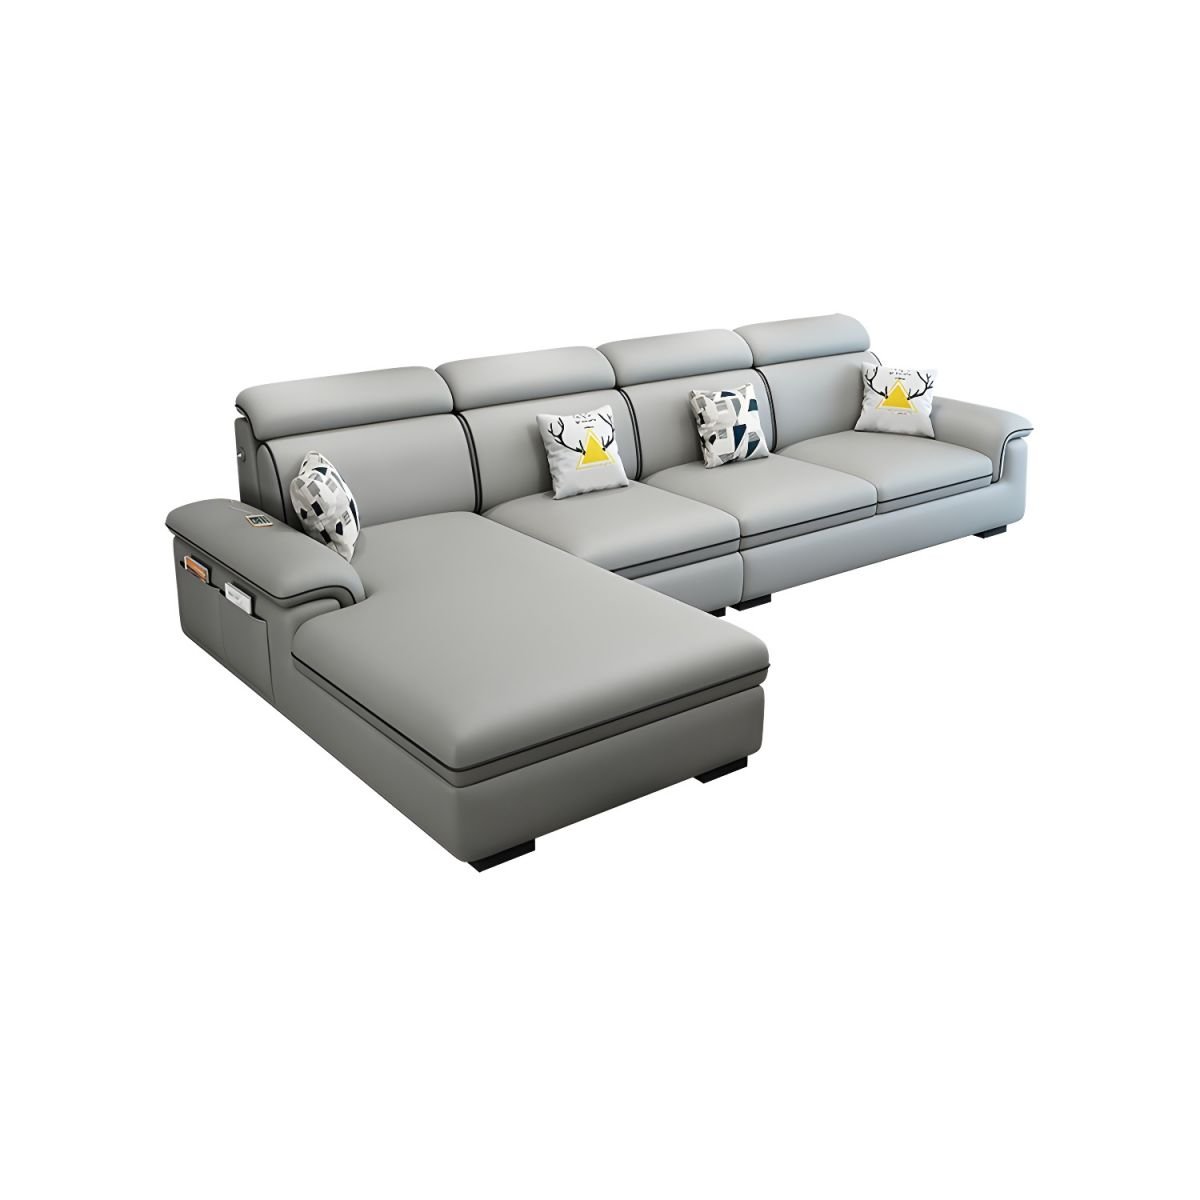 Wooden Modern 9 Feet L-Shape Sectionals No Distressing Seats 4 Storage Included Sofa Chaise - Left Tech Cloth Light Gray